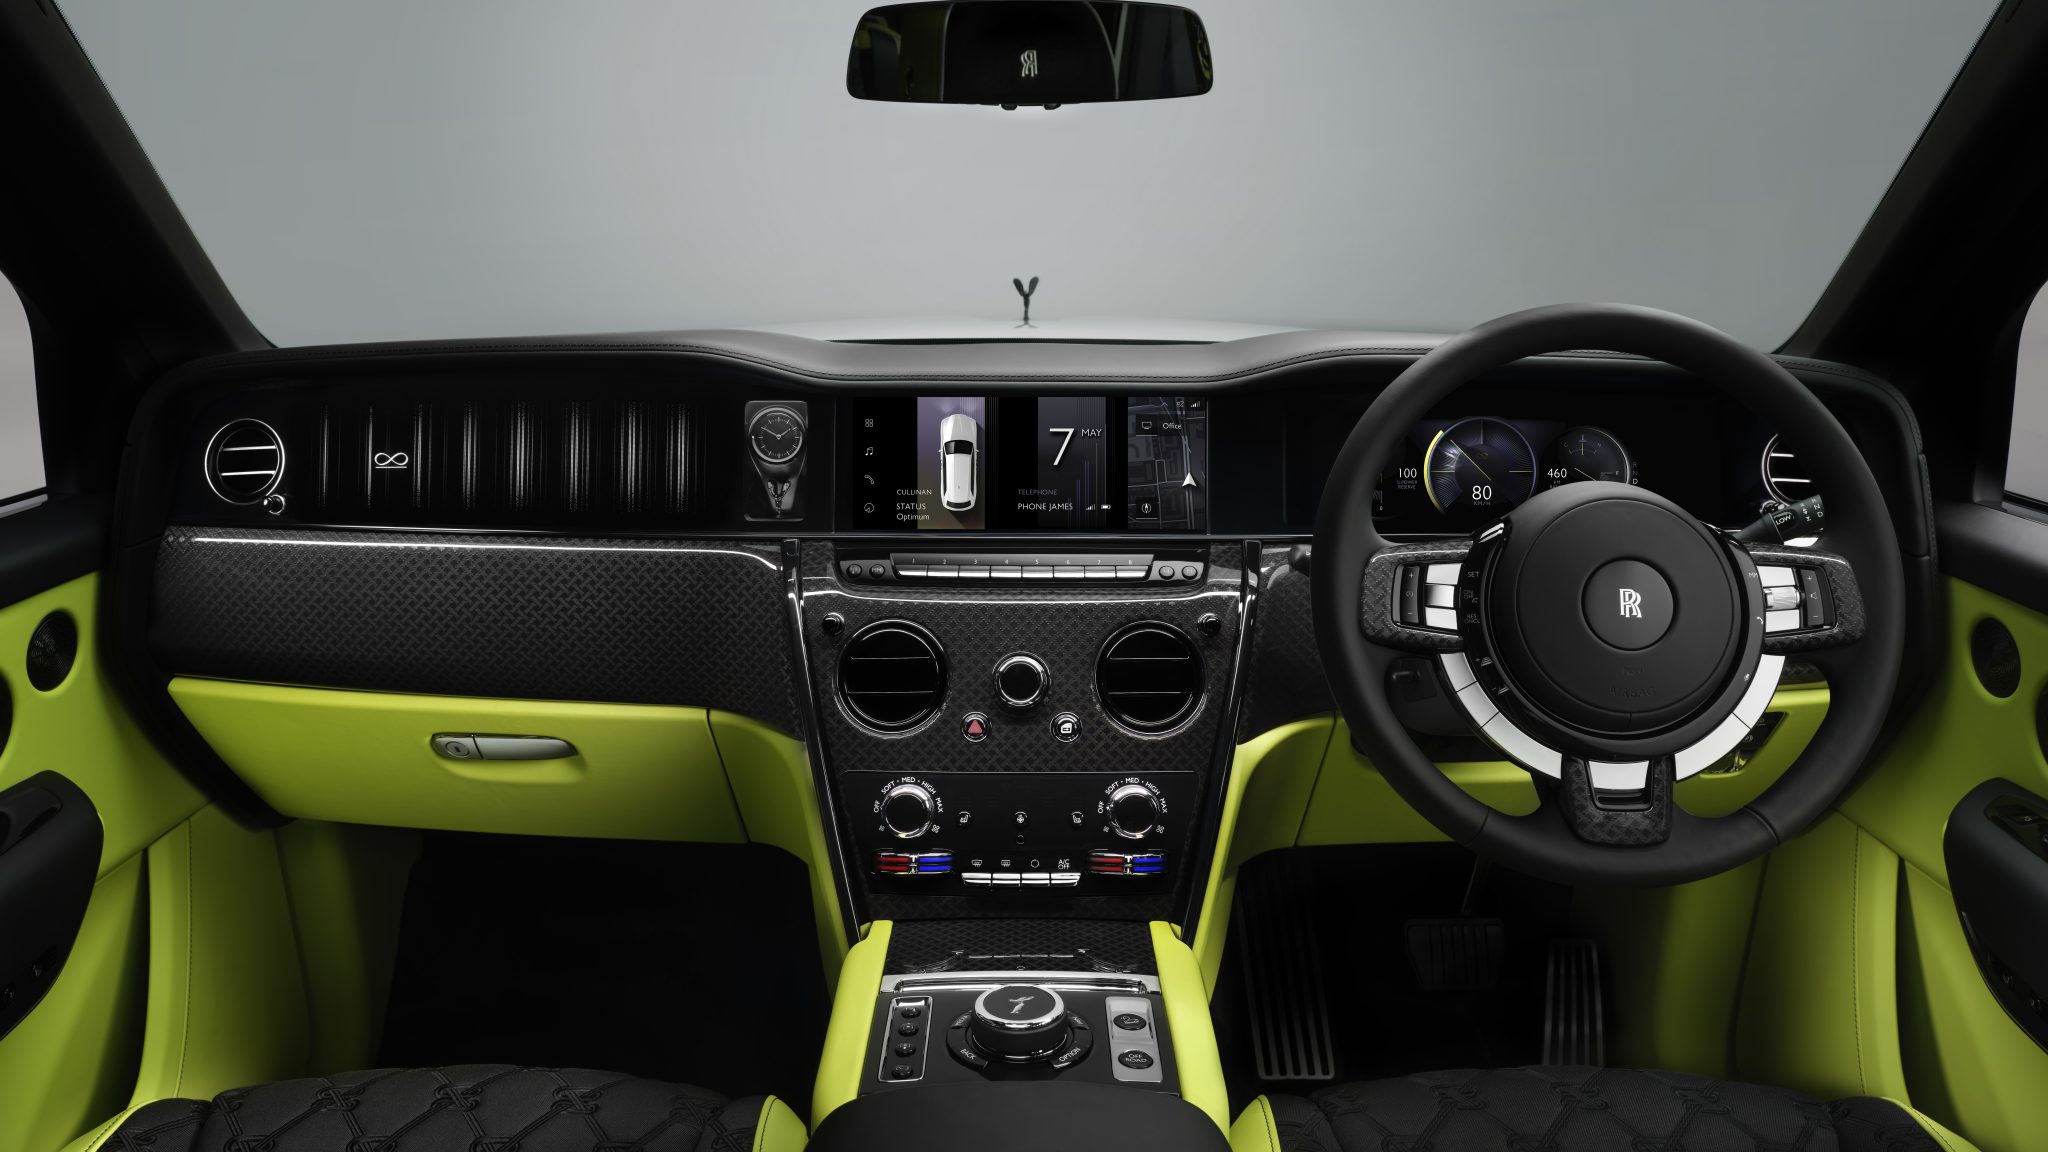 An image of an SUV's interior.